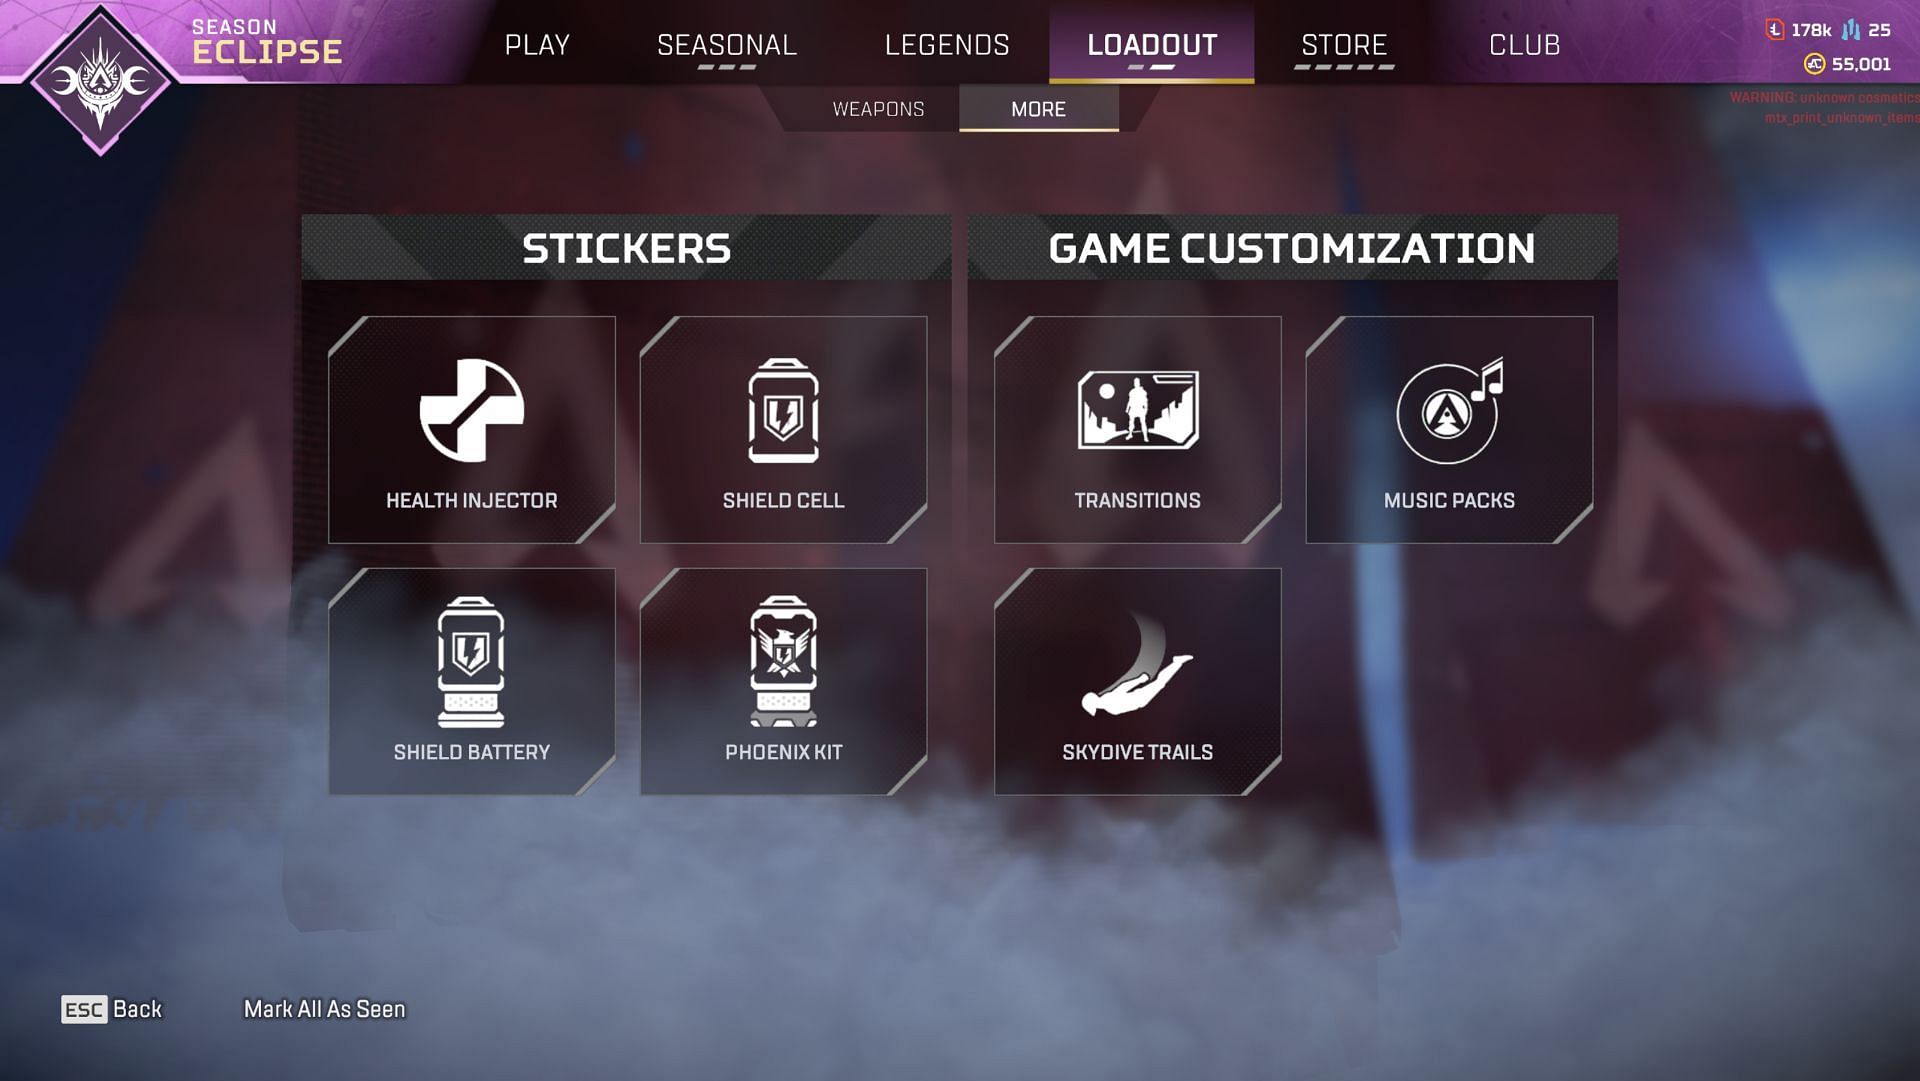 In-game footage of the Sticker menu under the Loadout in season 15 (image via EA)